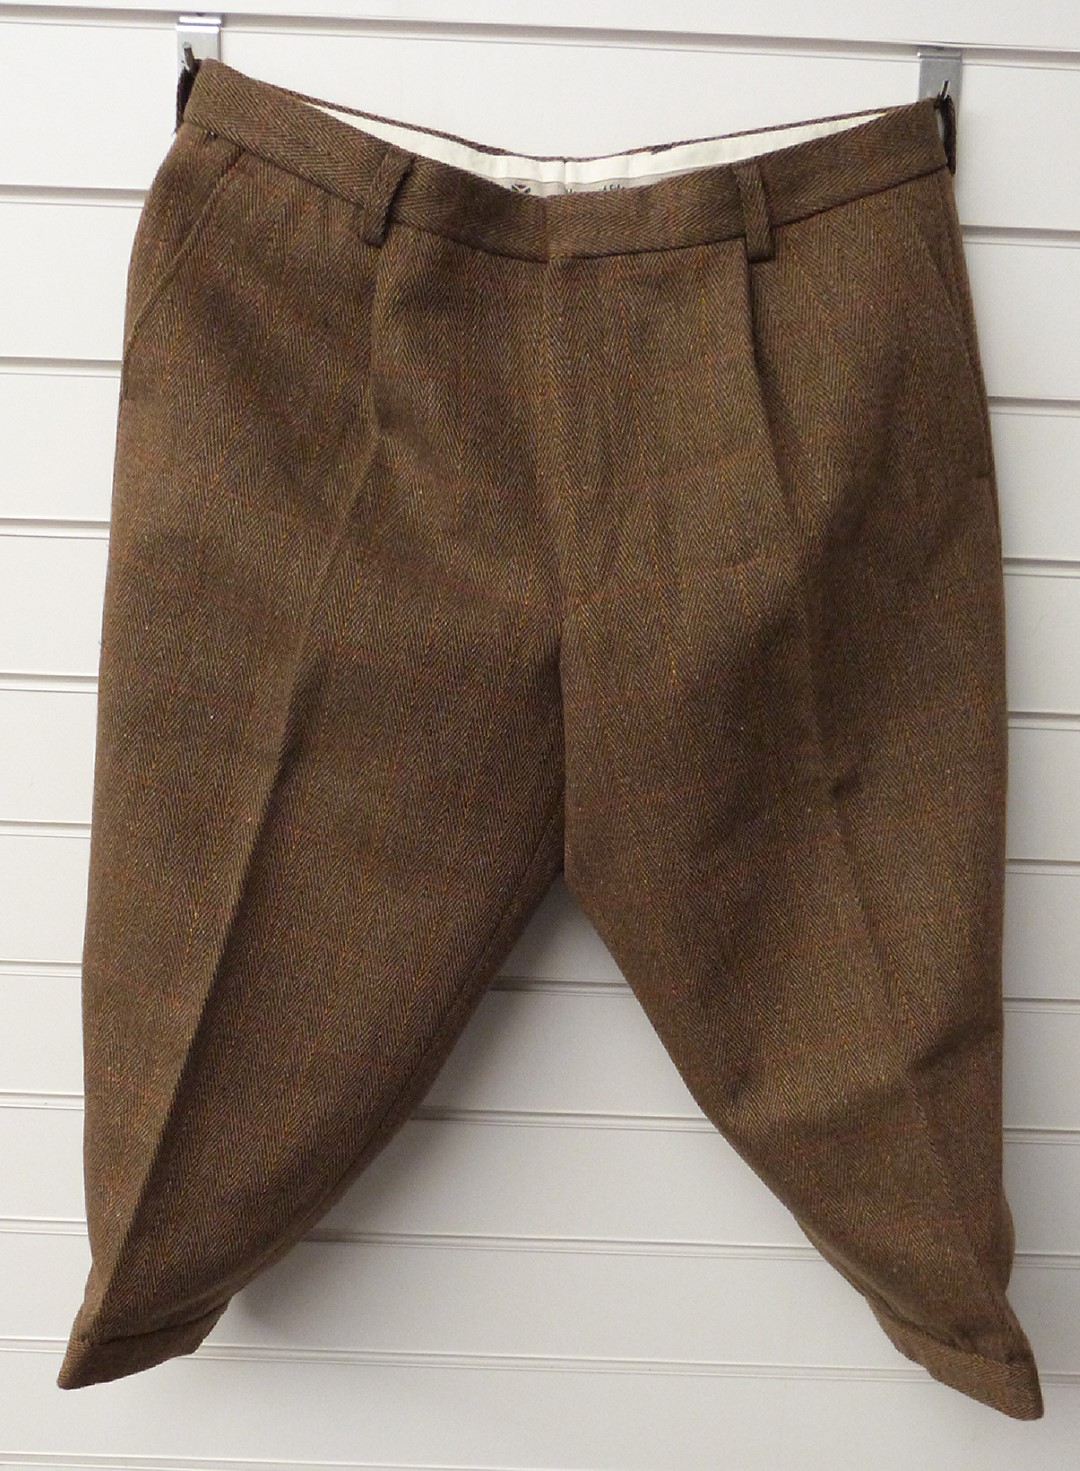 Woodstock Country Wear gentleman's tweed field coat (size XL) and two pairs of tweed breeks, size - Image 6 of 6